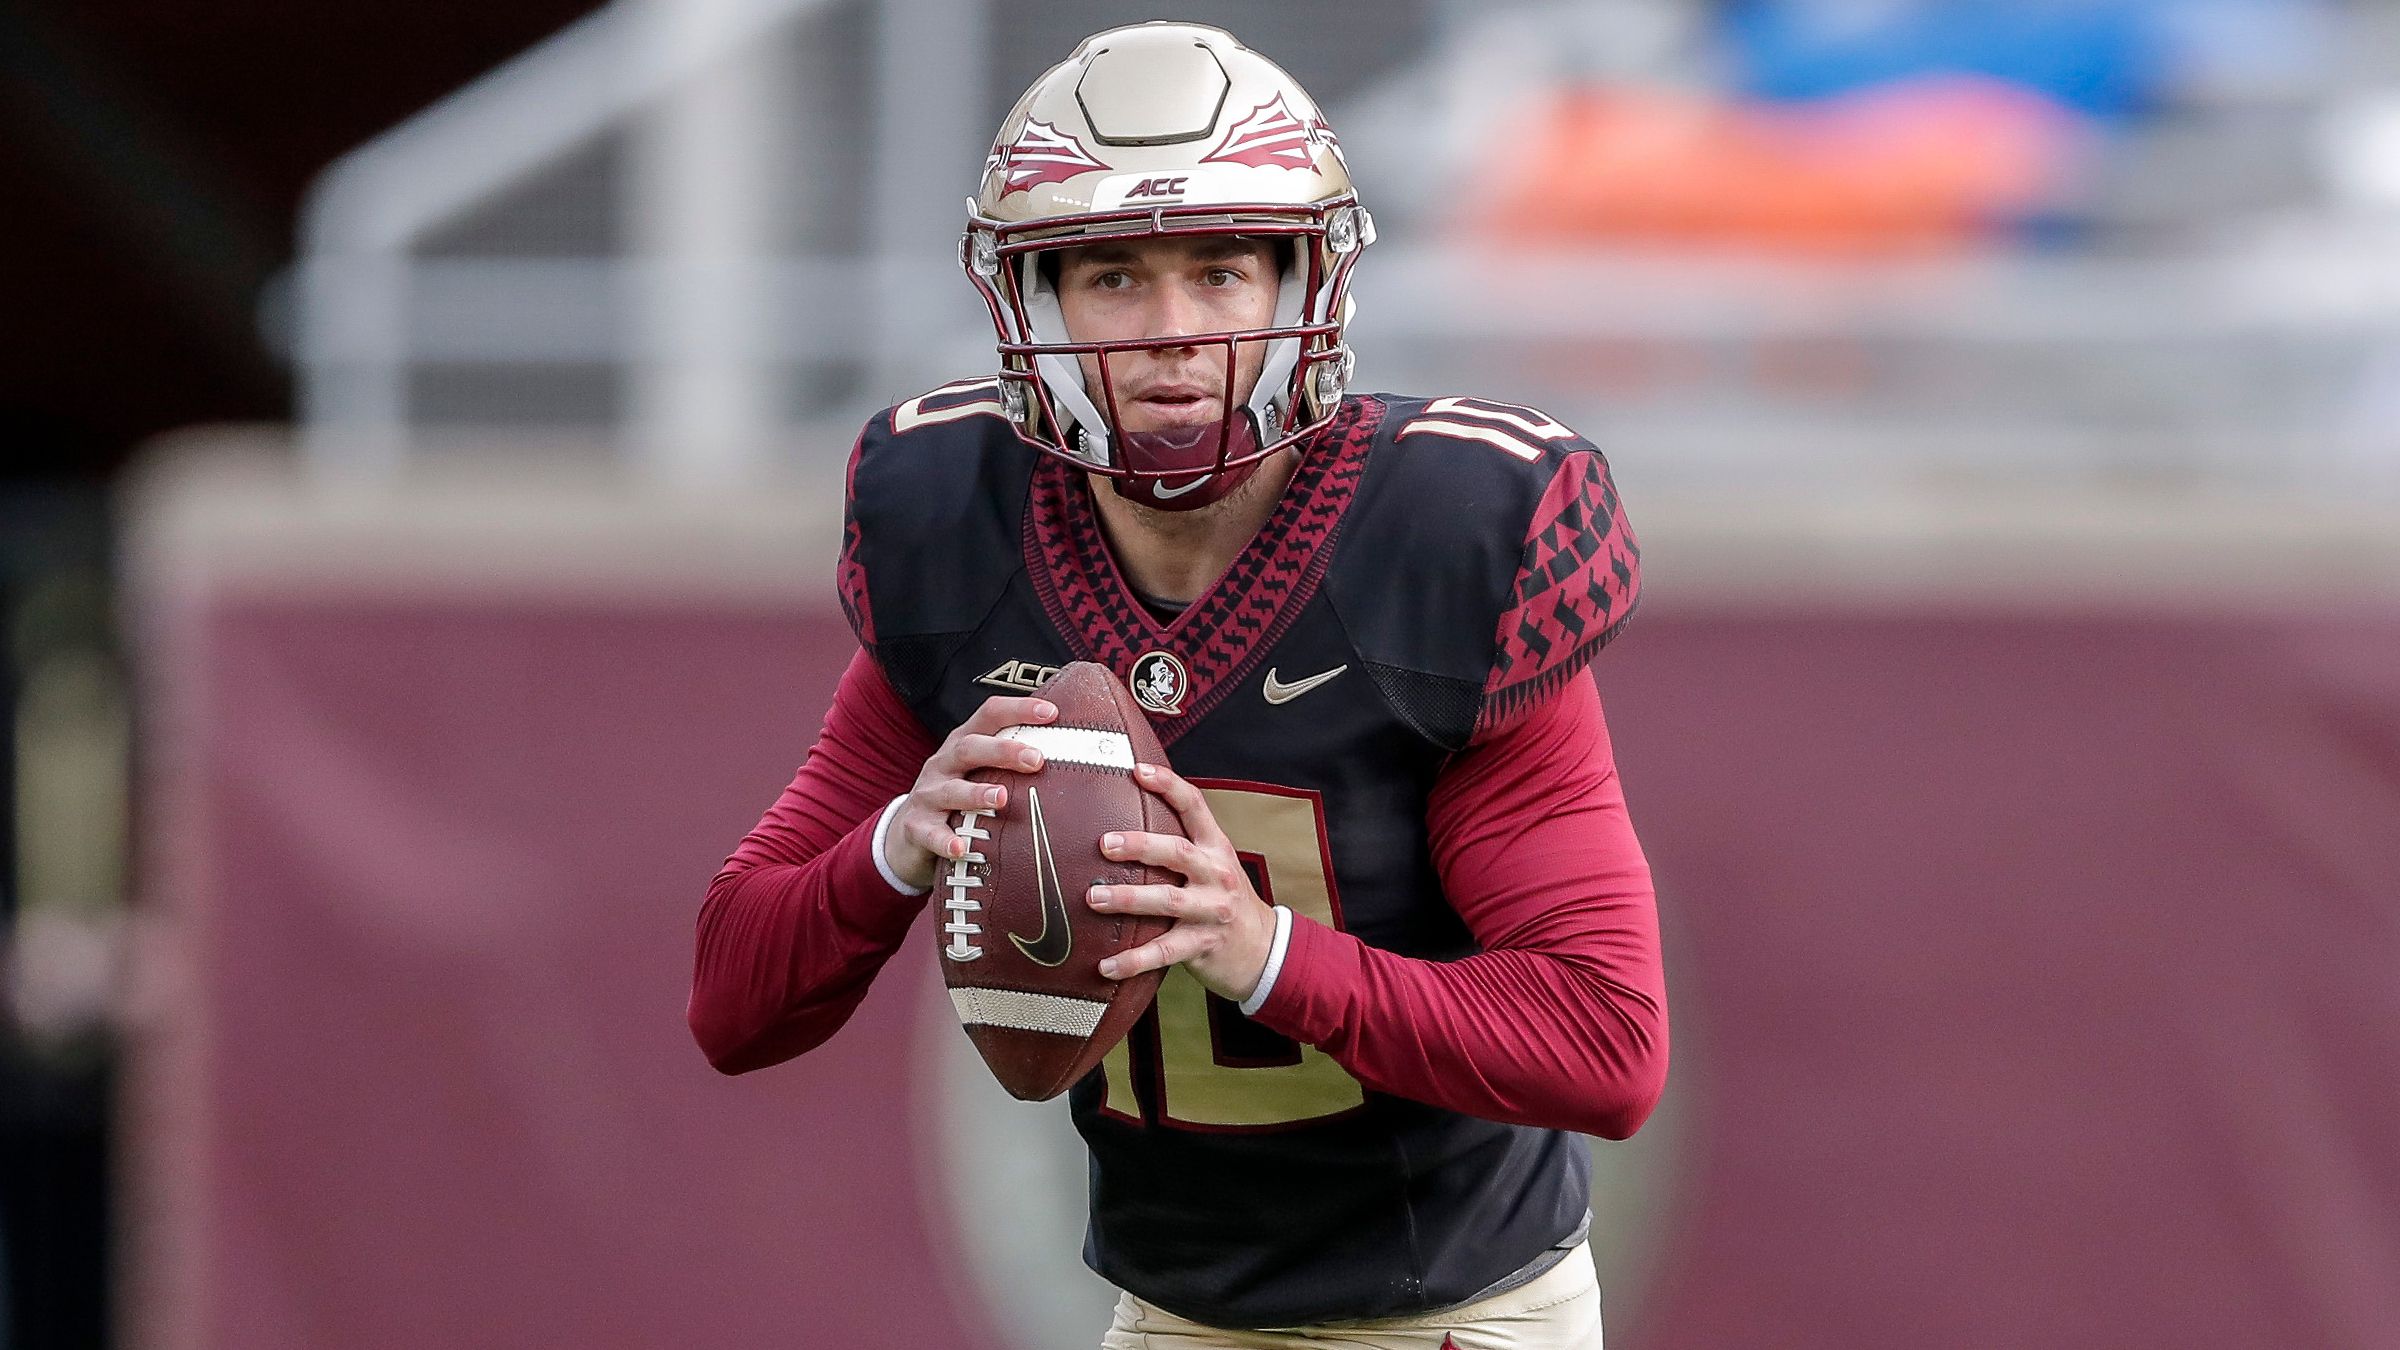 Florida State’s McKenzie Milton goes 4th-quarter TD drive in first game to victory over Notre Dame